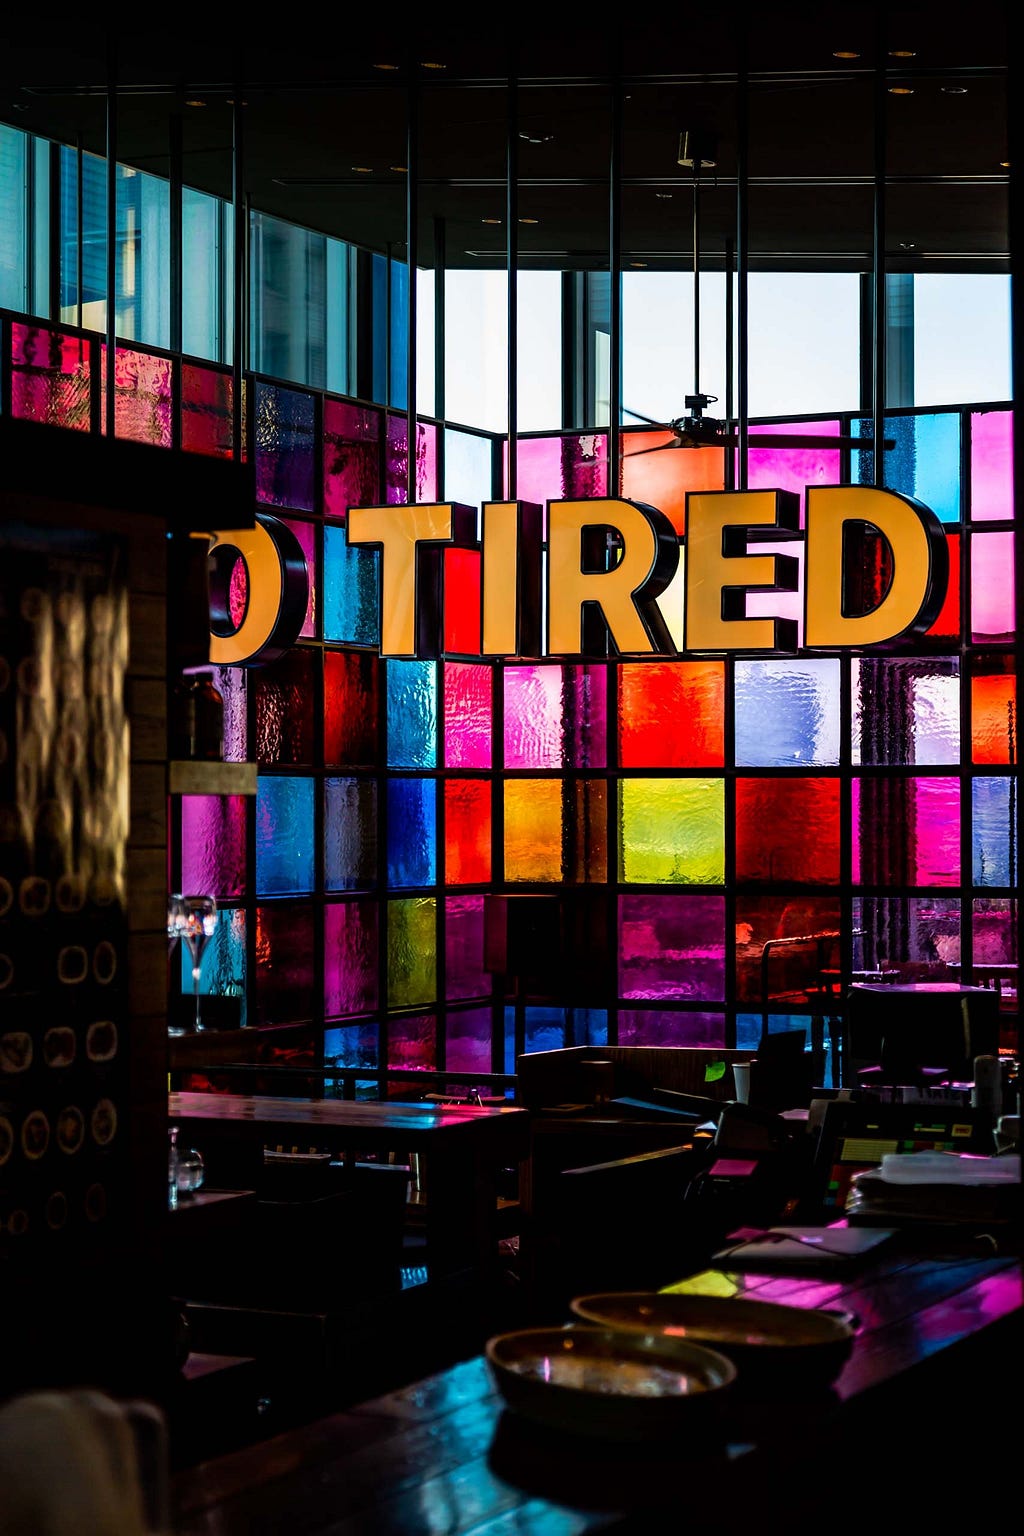 The word ‘tired’ hangs from the ceiling like a light in front of a stained glass window.